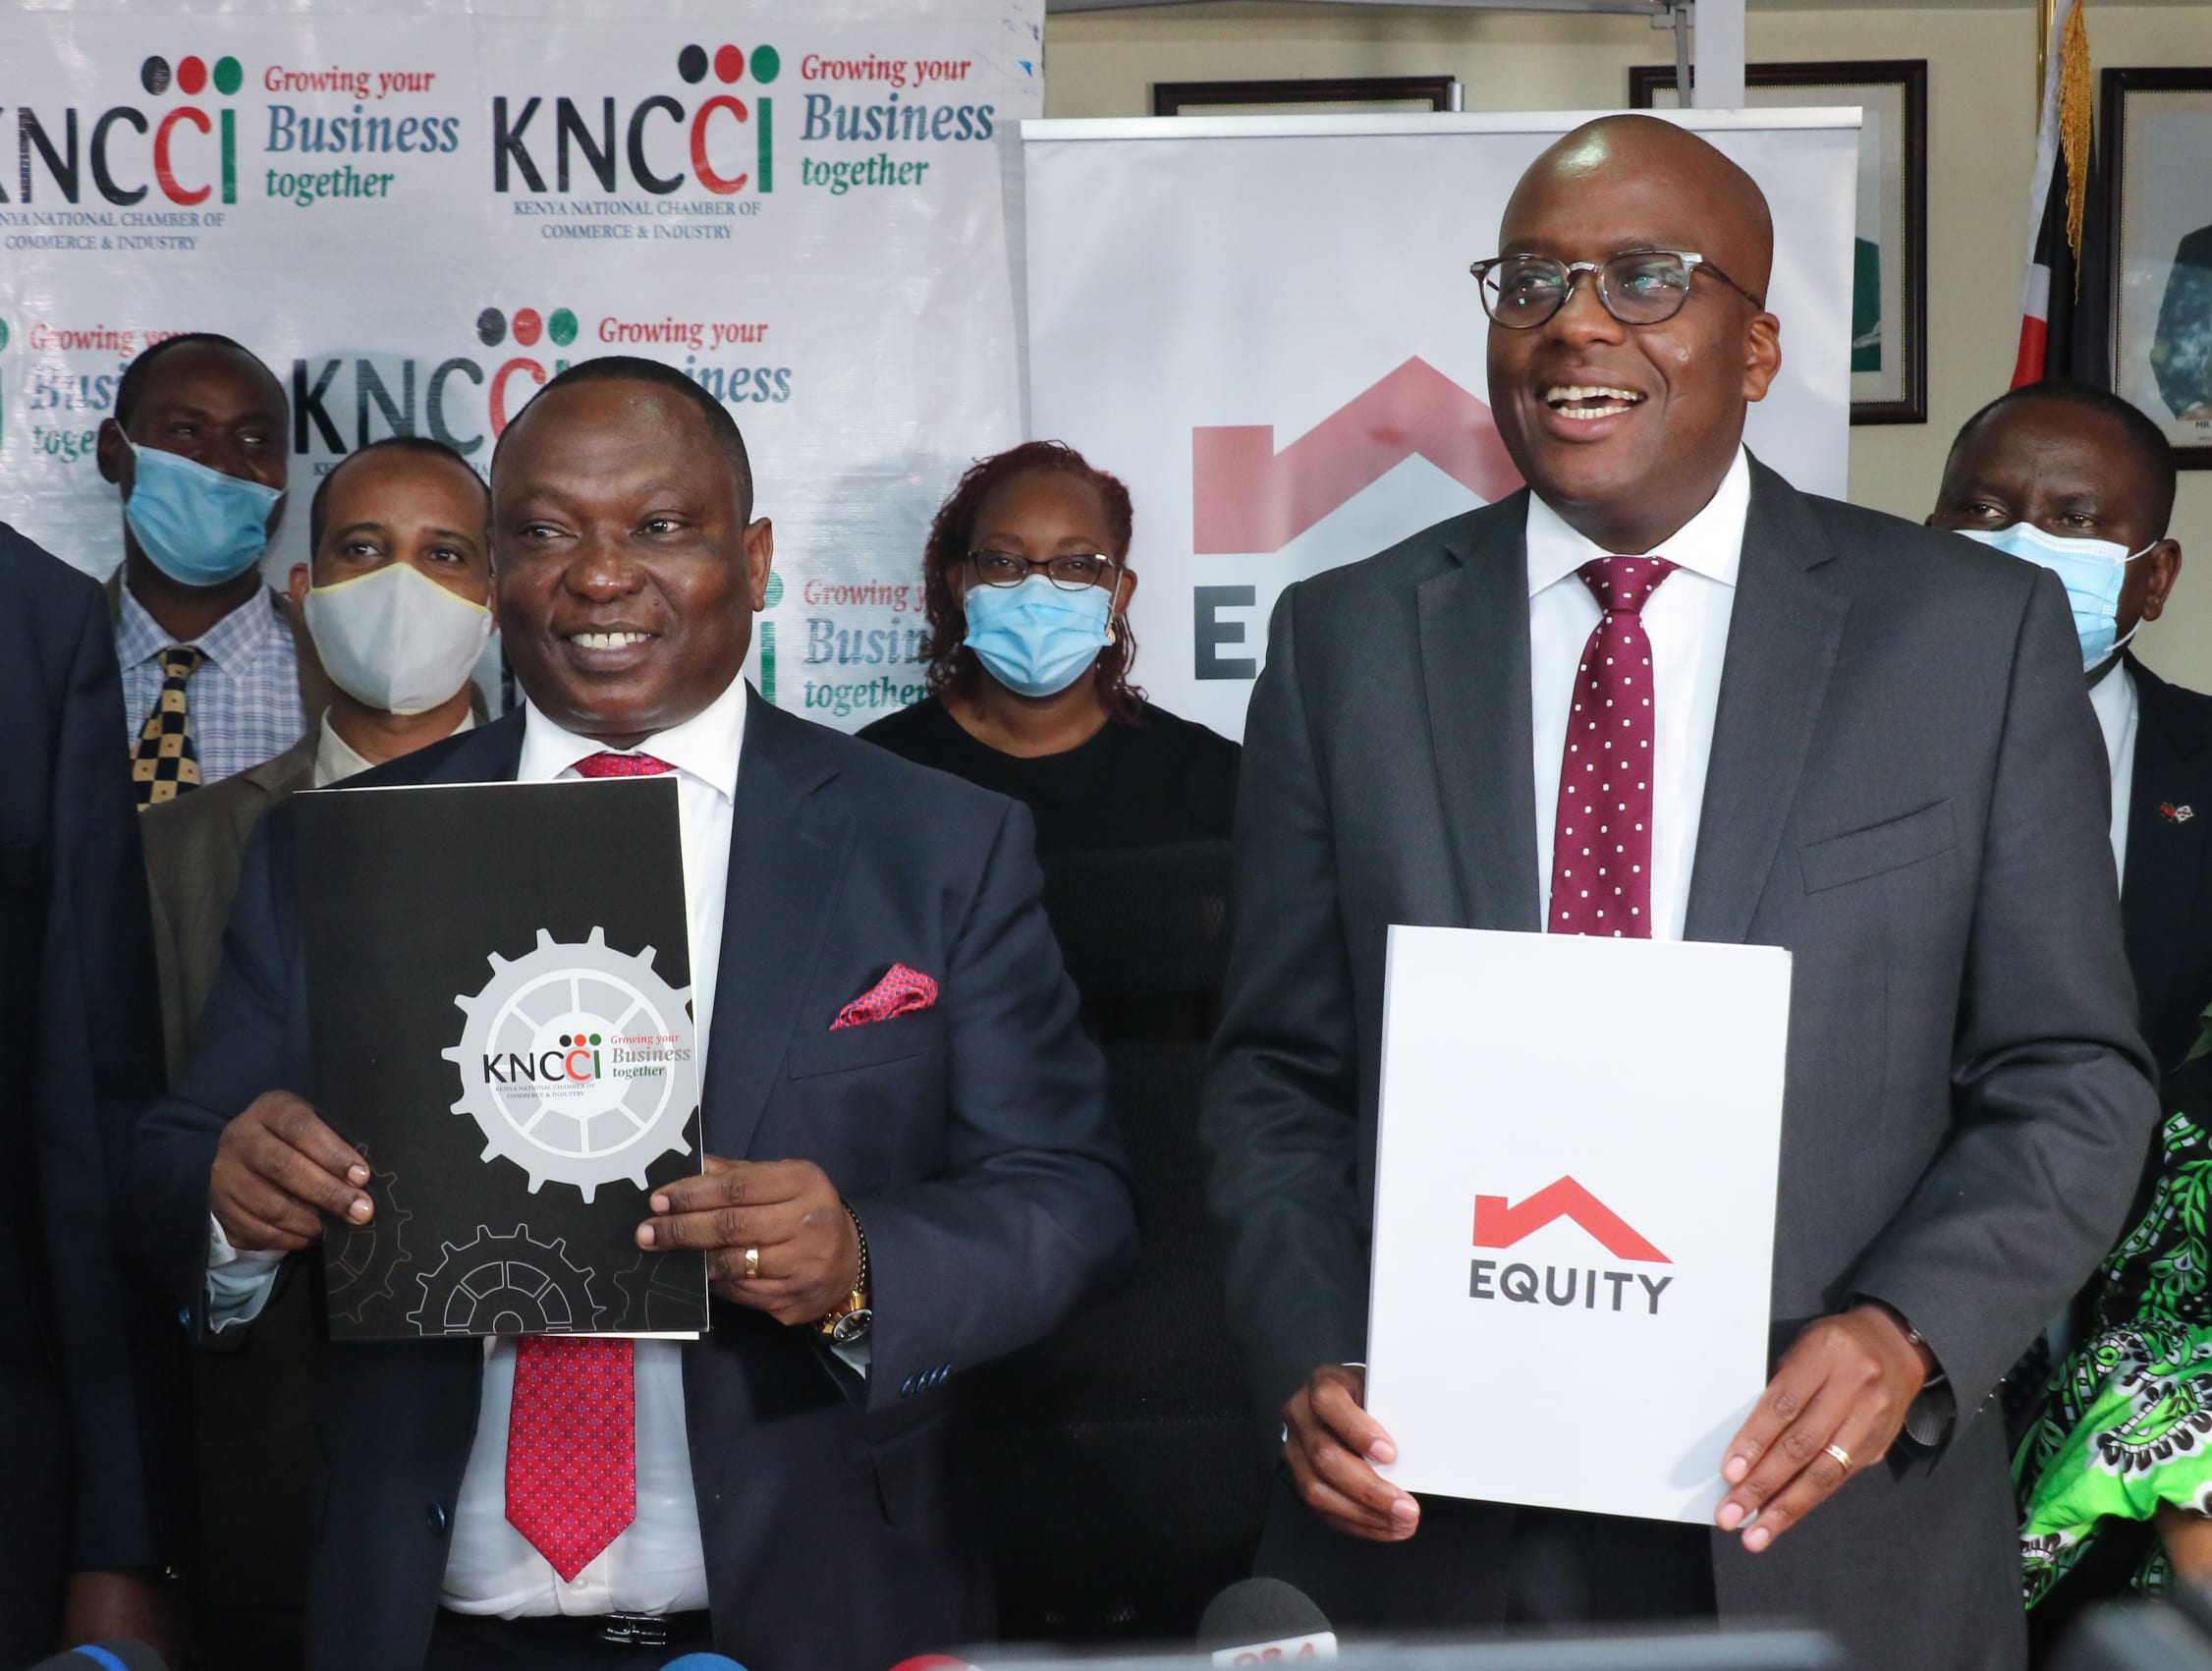 Equity, KNCCI roll out Ksh.200 billion loan facility to support small businesses